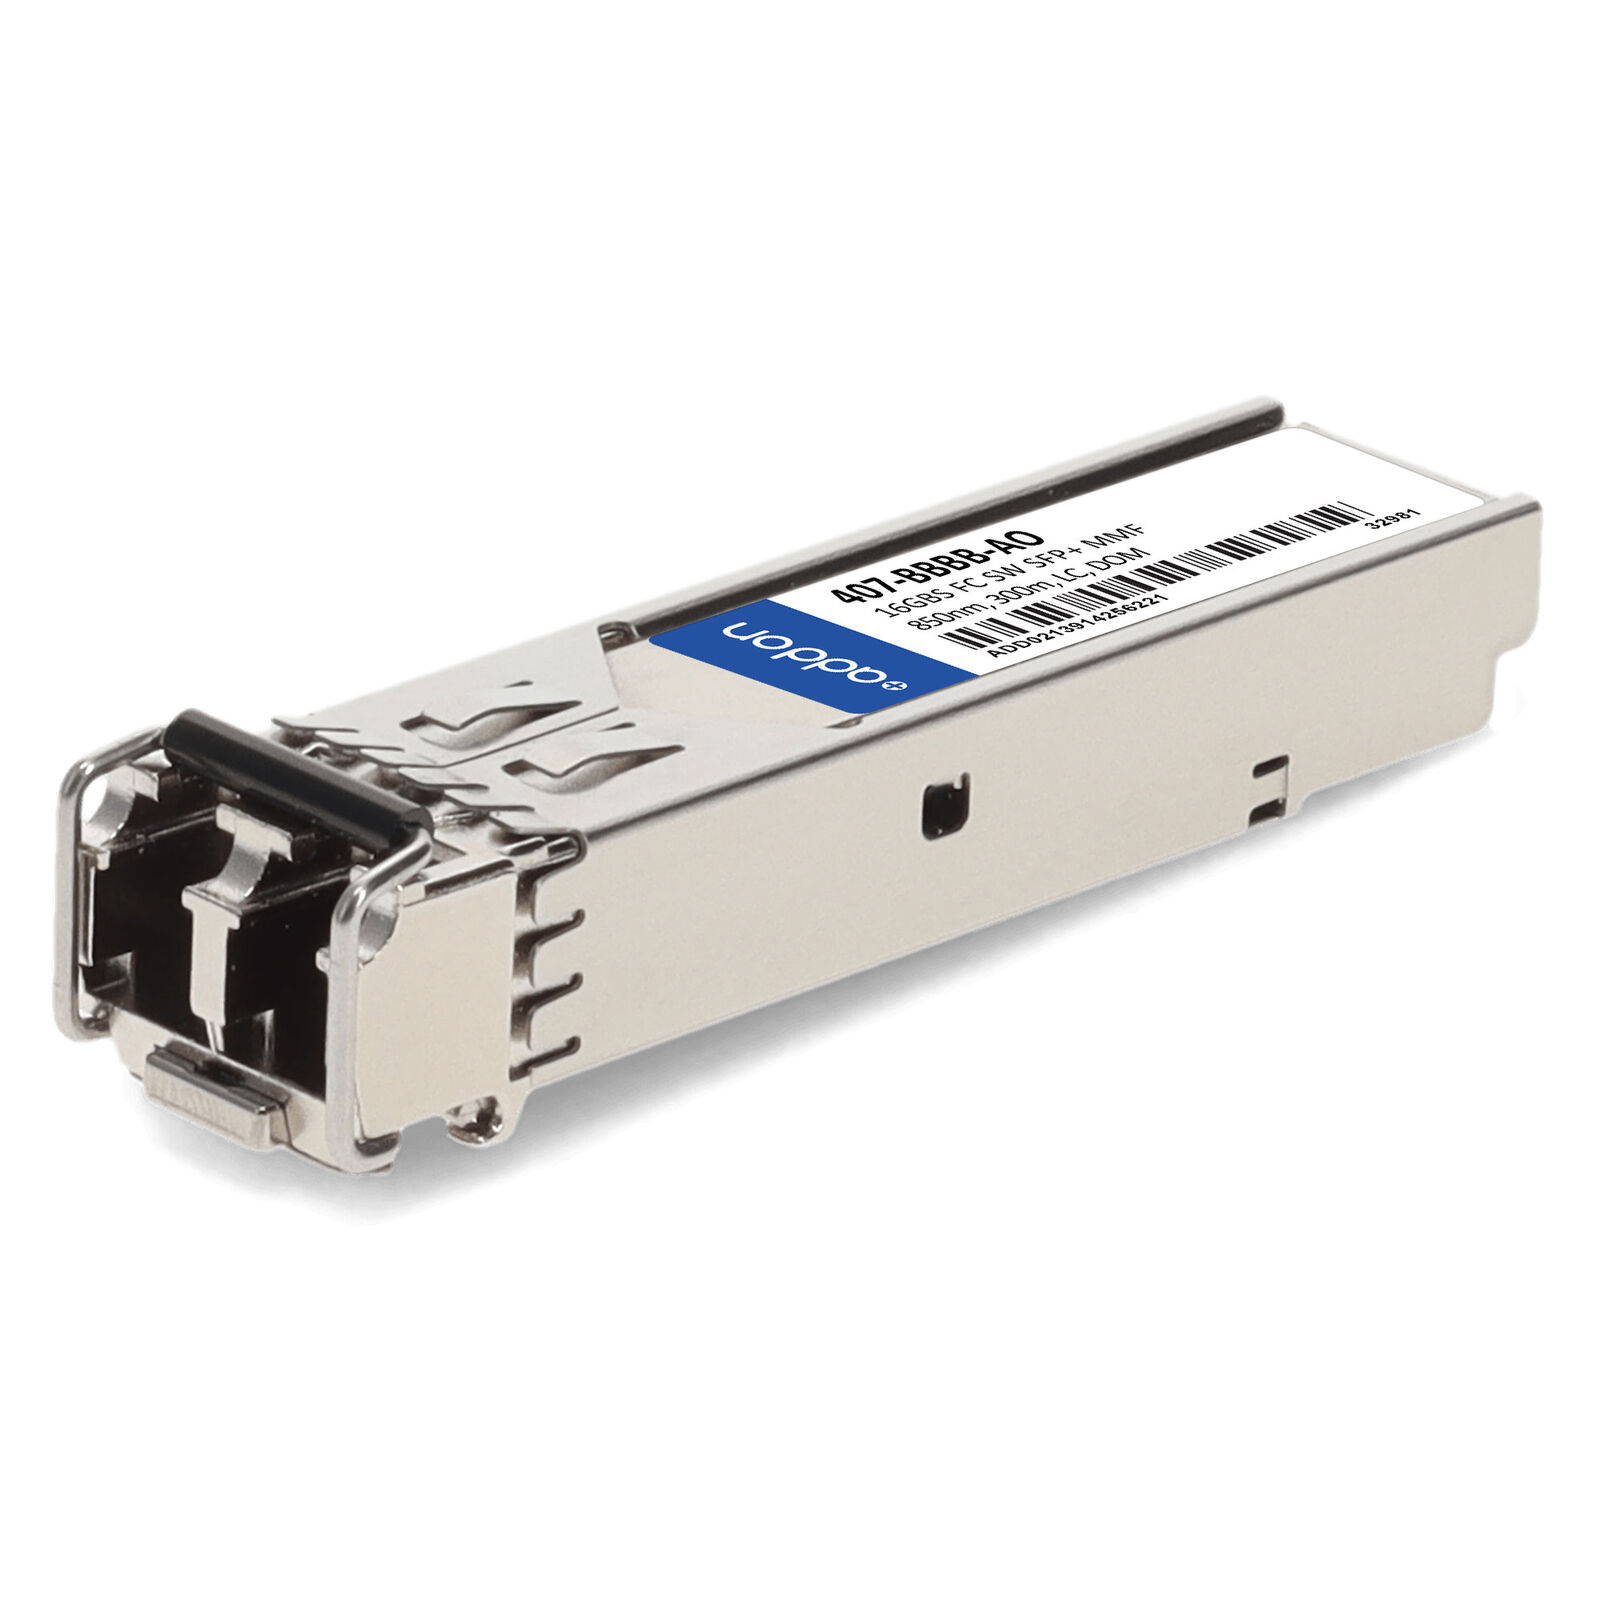 Addon-New-430-4436-AO _ Dell 430-4436 Comparable Dual SFP+ Port PCIe N